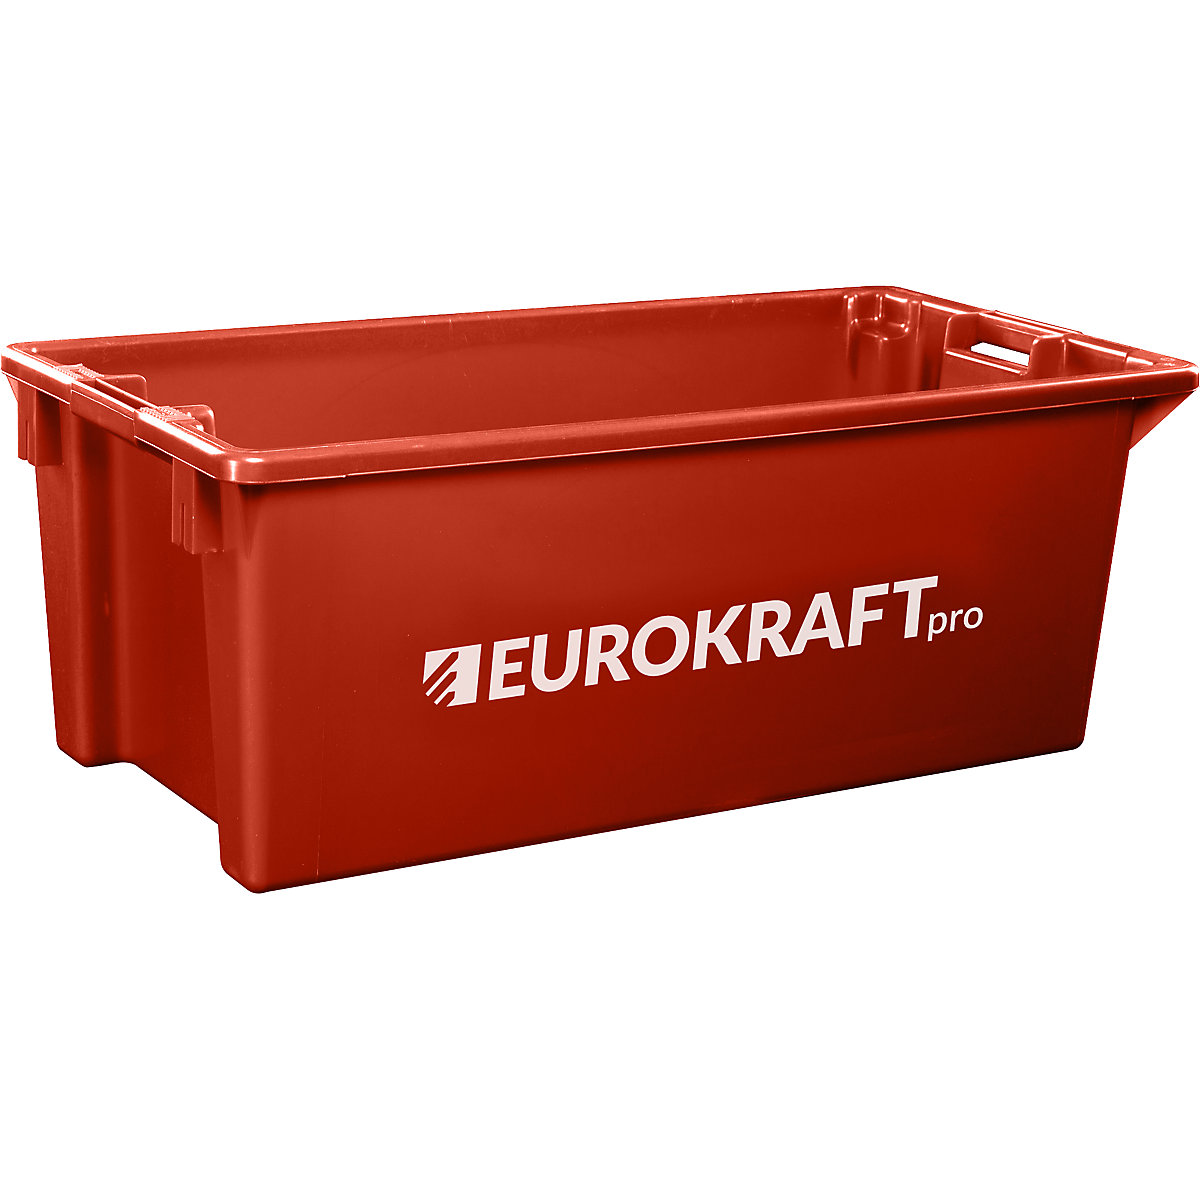 EUROKRAFTpro – Stack/nest container made of polypropylene suitable for foodstuffs, 13 l capacity, pack of 4, solid walls and base, red